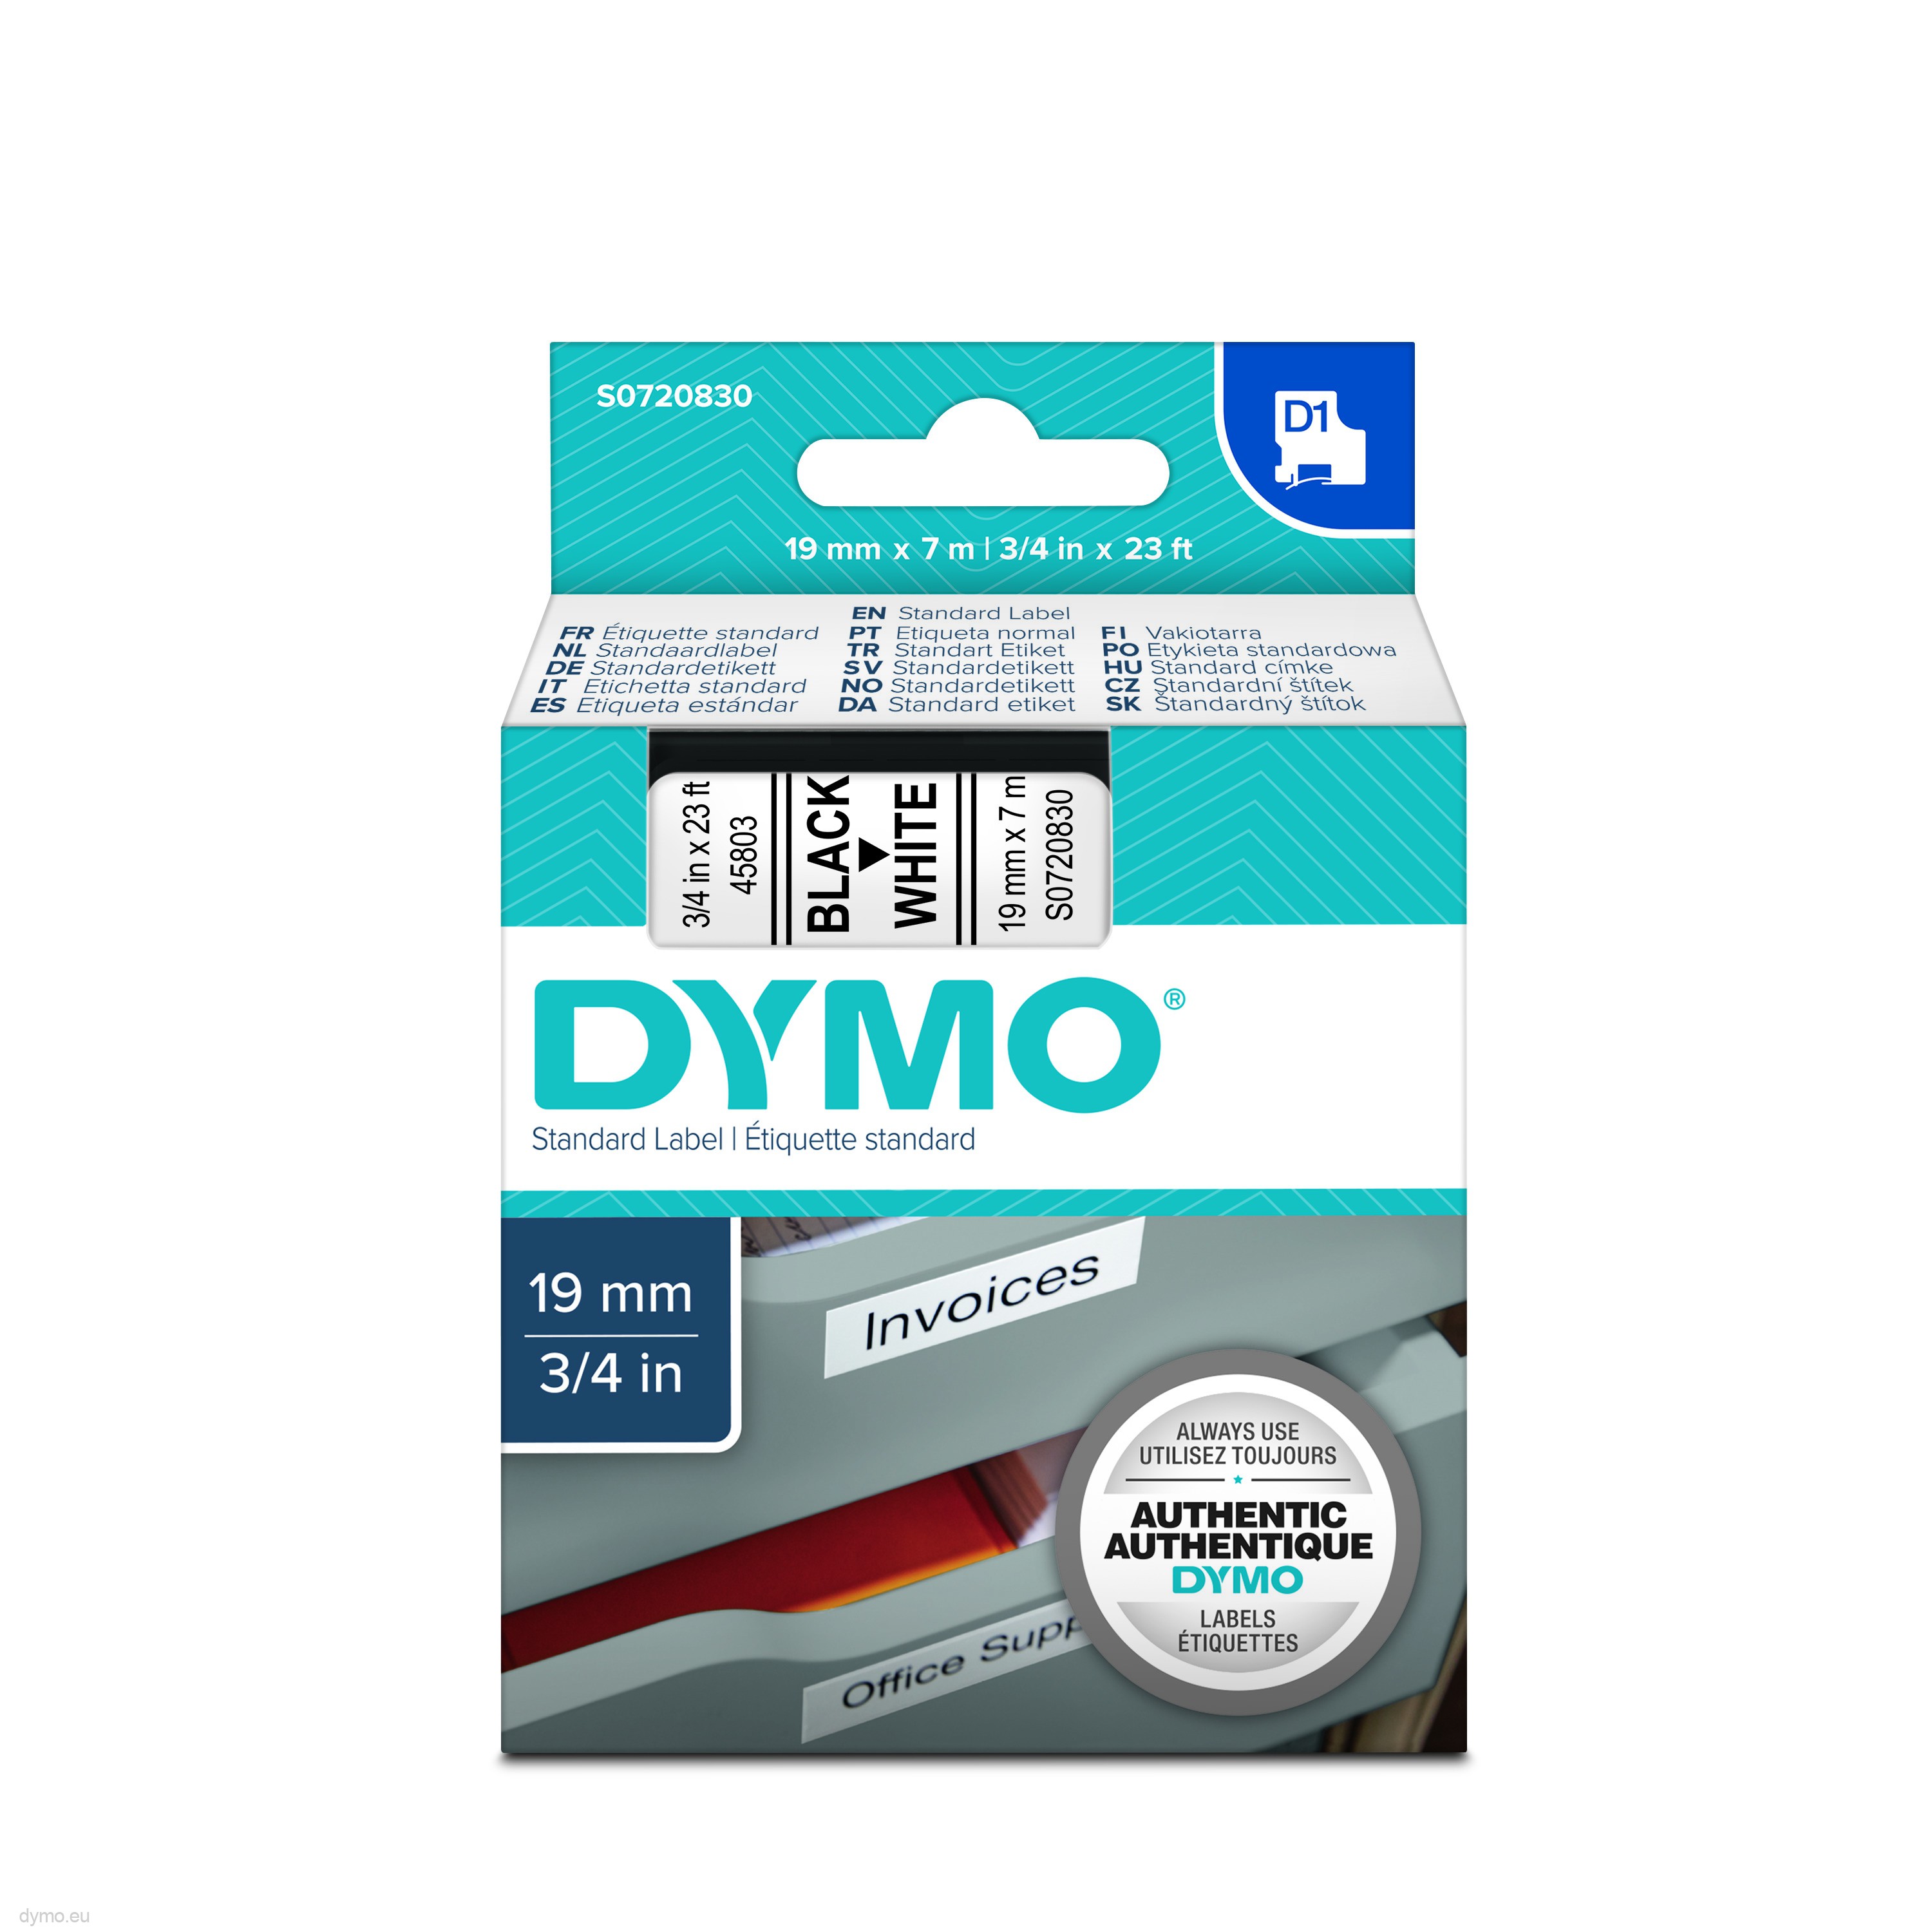 tape cartridge 45801 blue on clear background 19mm x 7m for D1 DYMO labeller